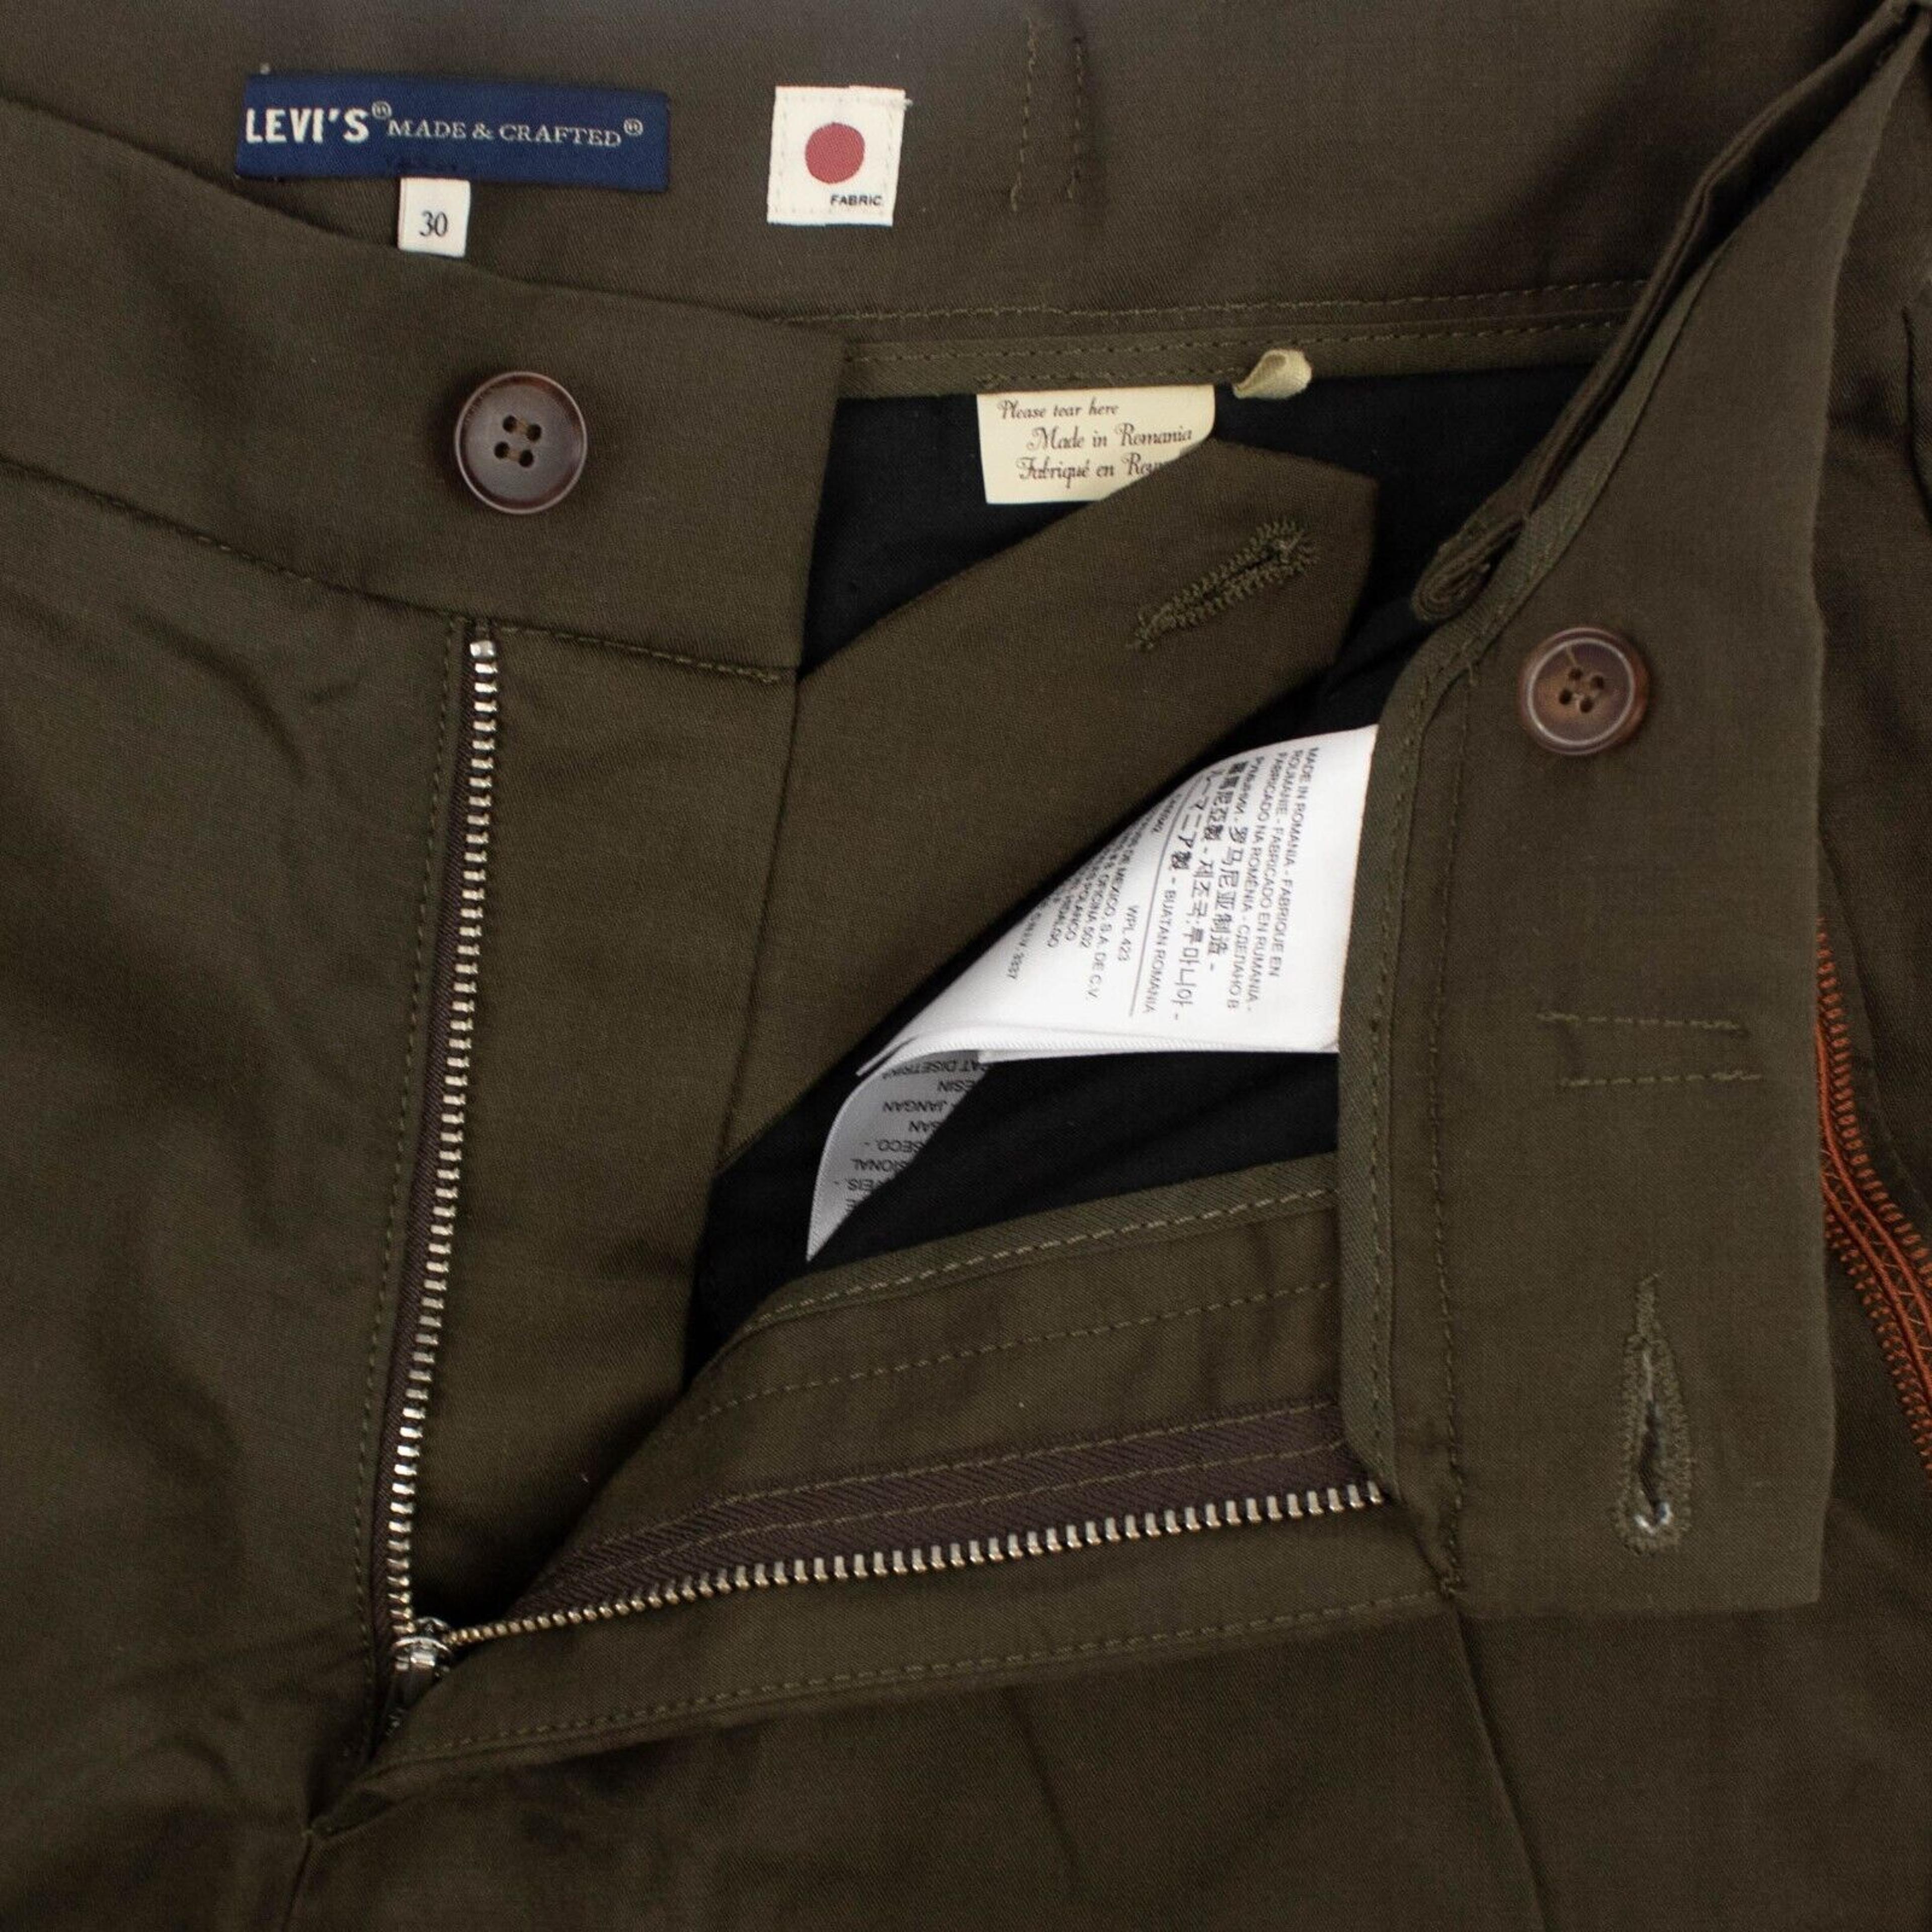 Alternate View 2 of Levi'S Made & Crafted Fern Pants - Olive Green